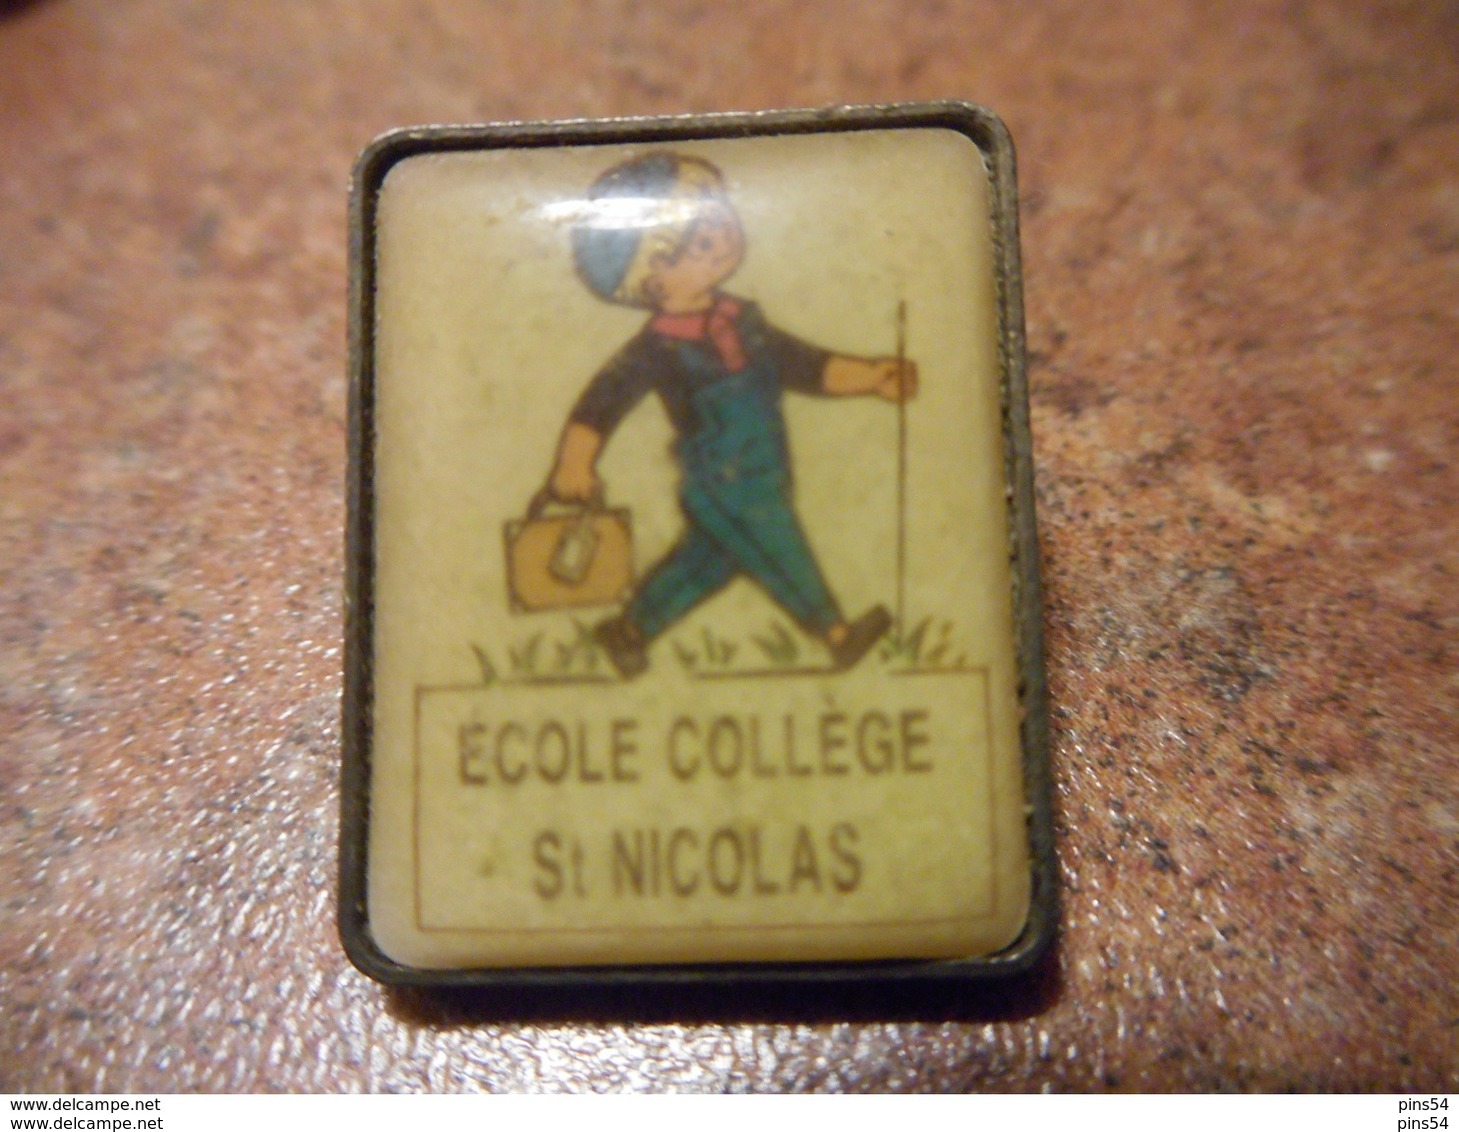 A022 -- Pin's Ecole College St Nicolas - Administrations